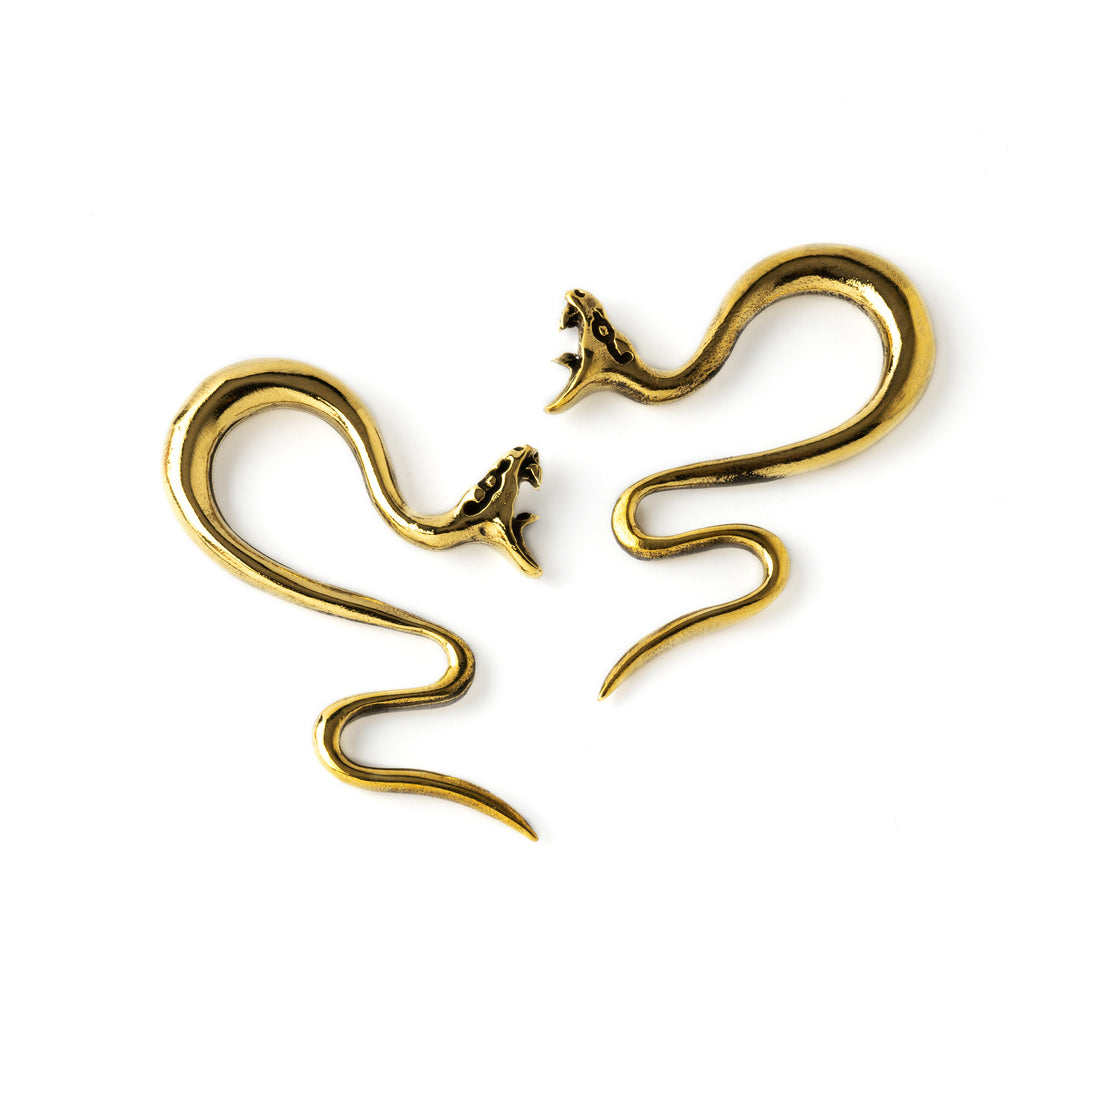 pair of gold brass serpent ear hangers for stretched ears size 4g, 2g, 0g frontal view